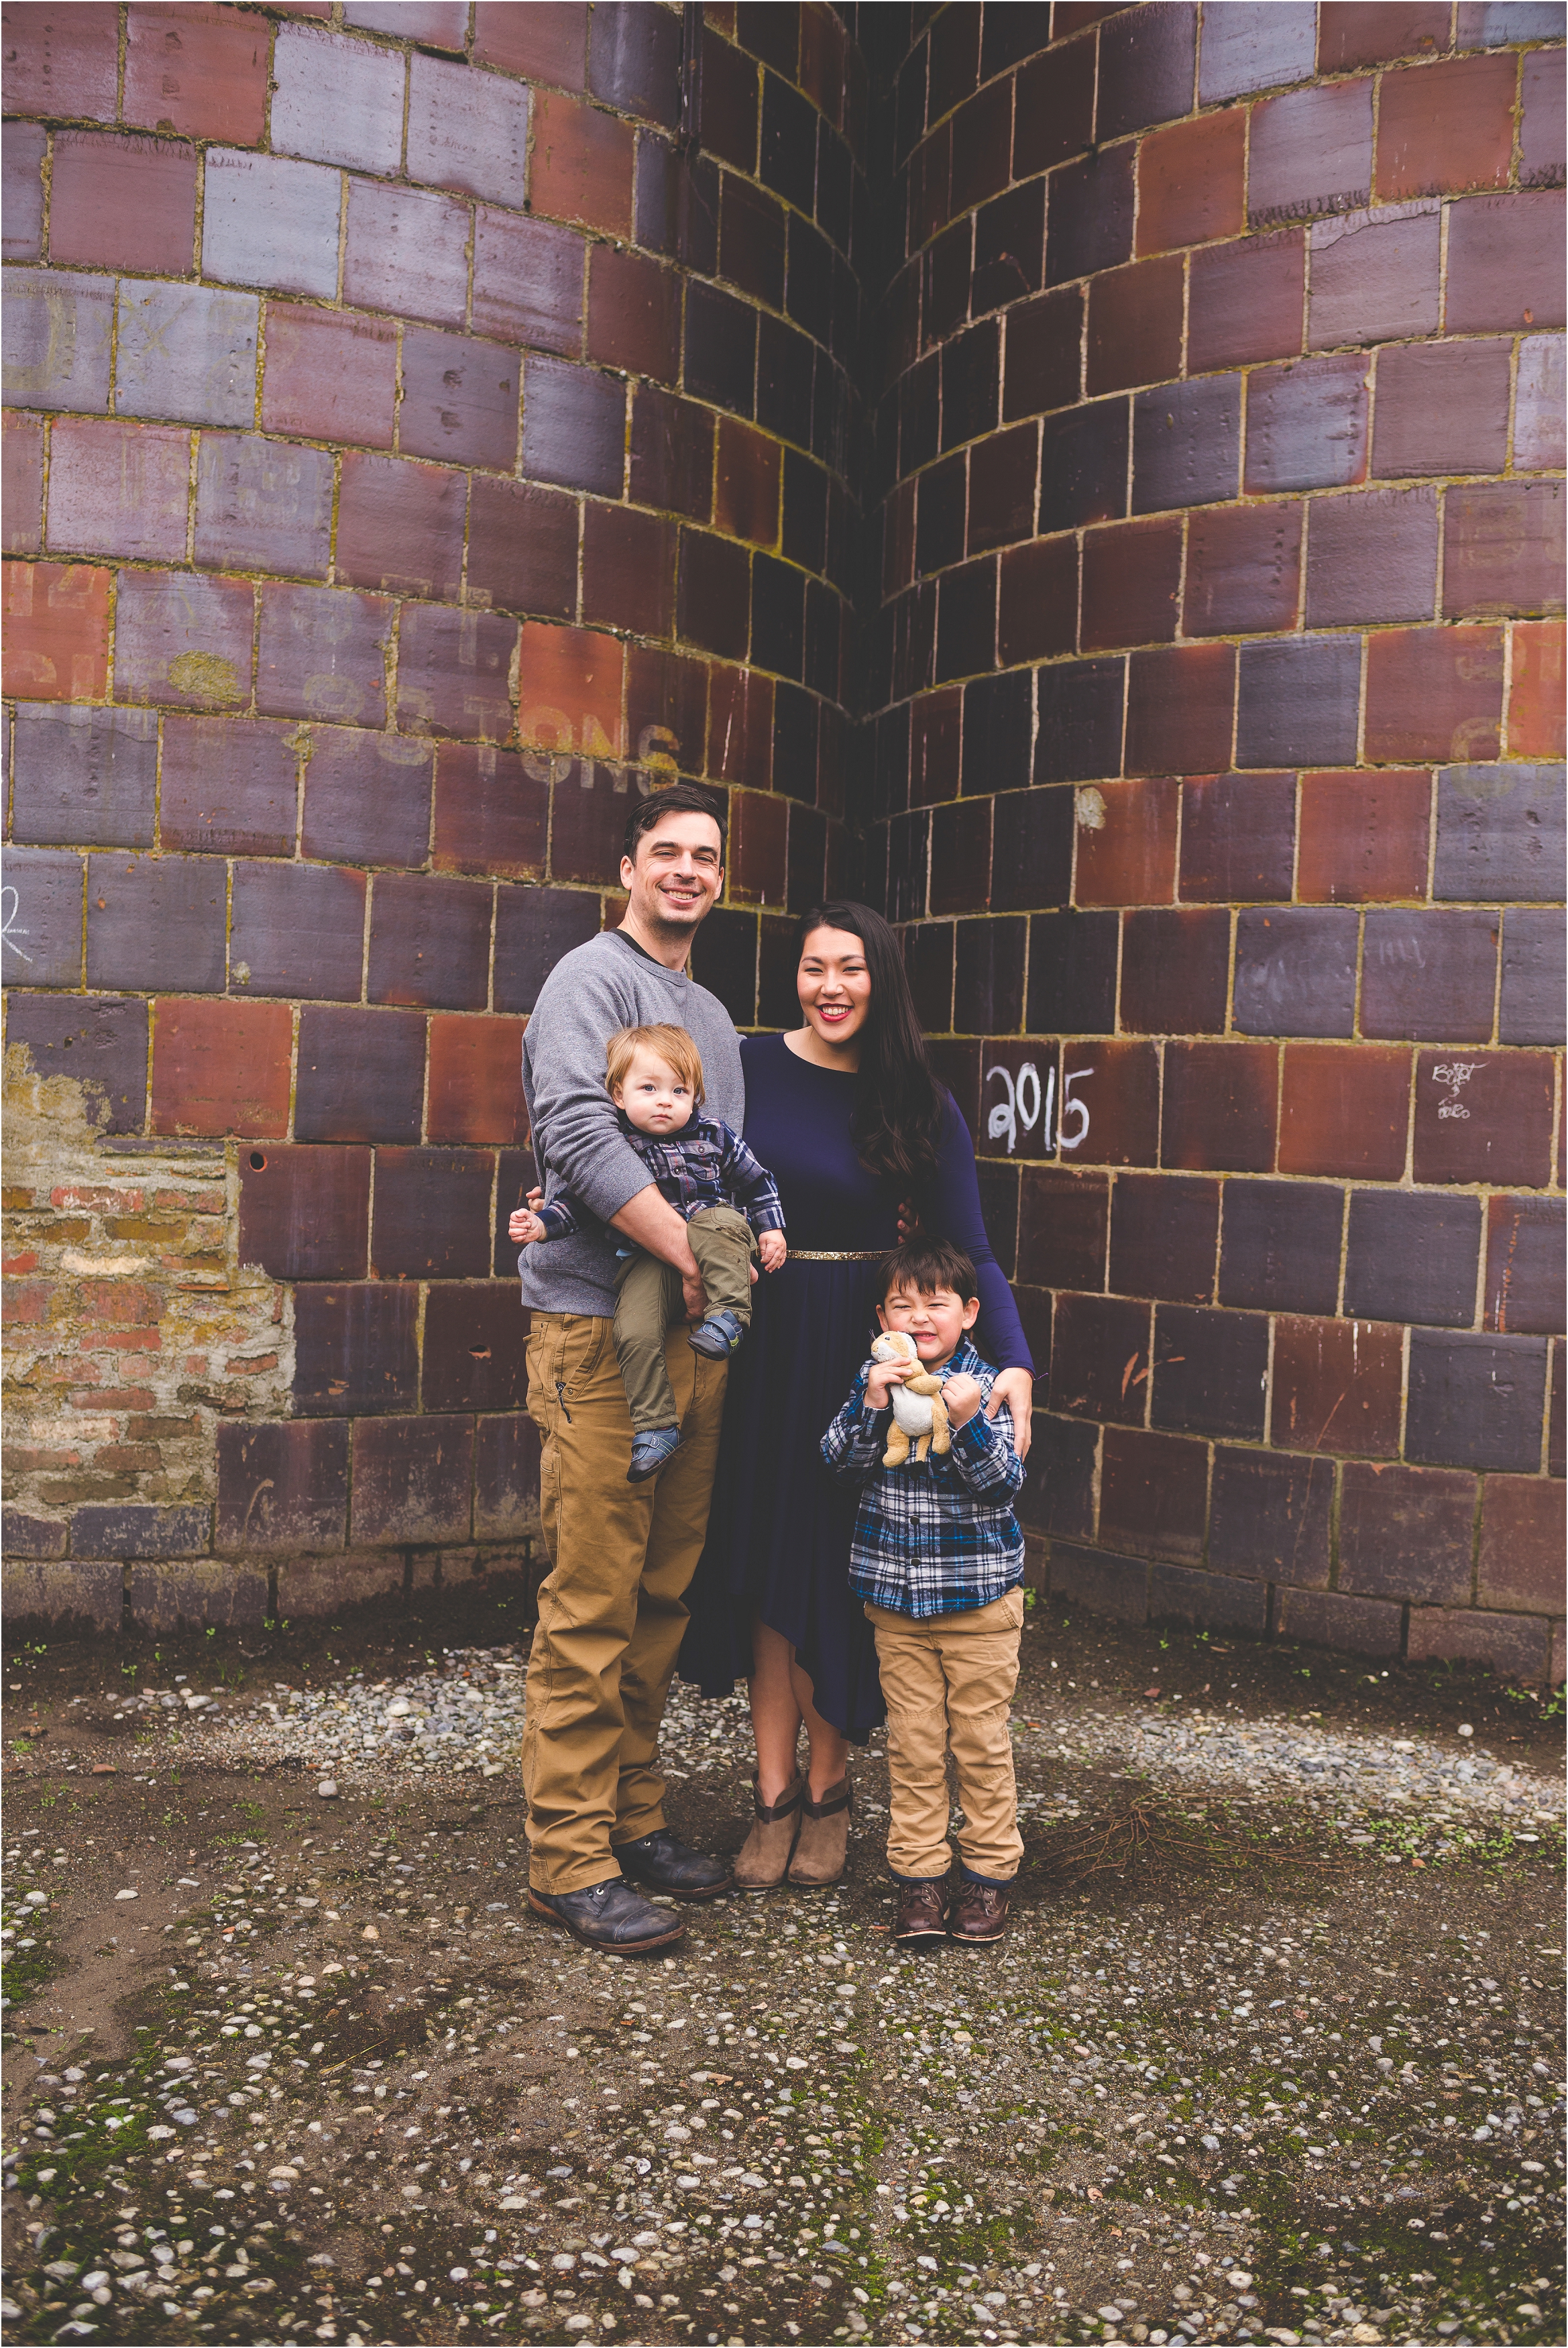 fort-steilacoom-park-family-session-jannicka-mayte-pacific-northwest-lifestyle-photographer_0038.jpg